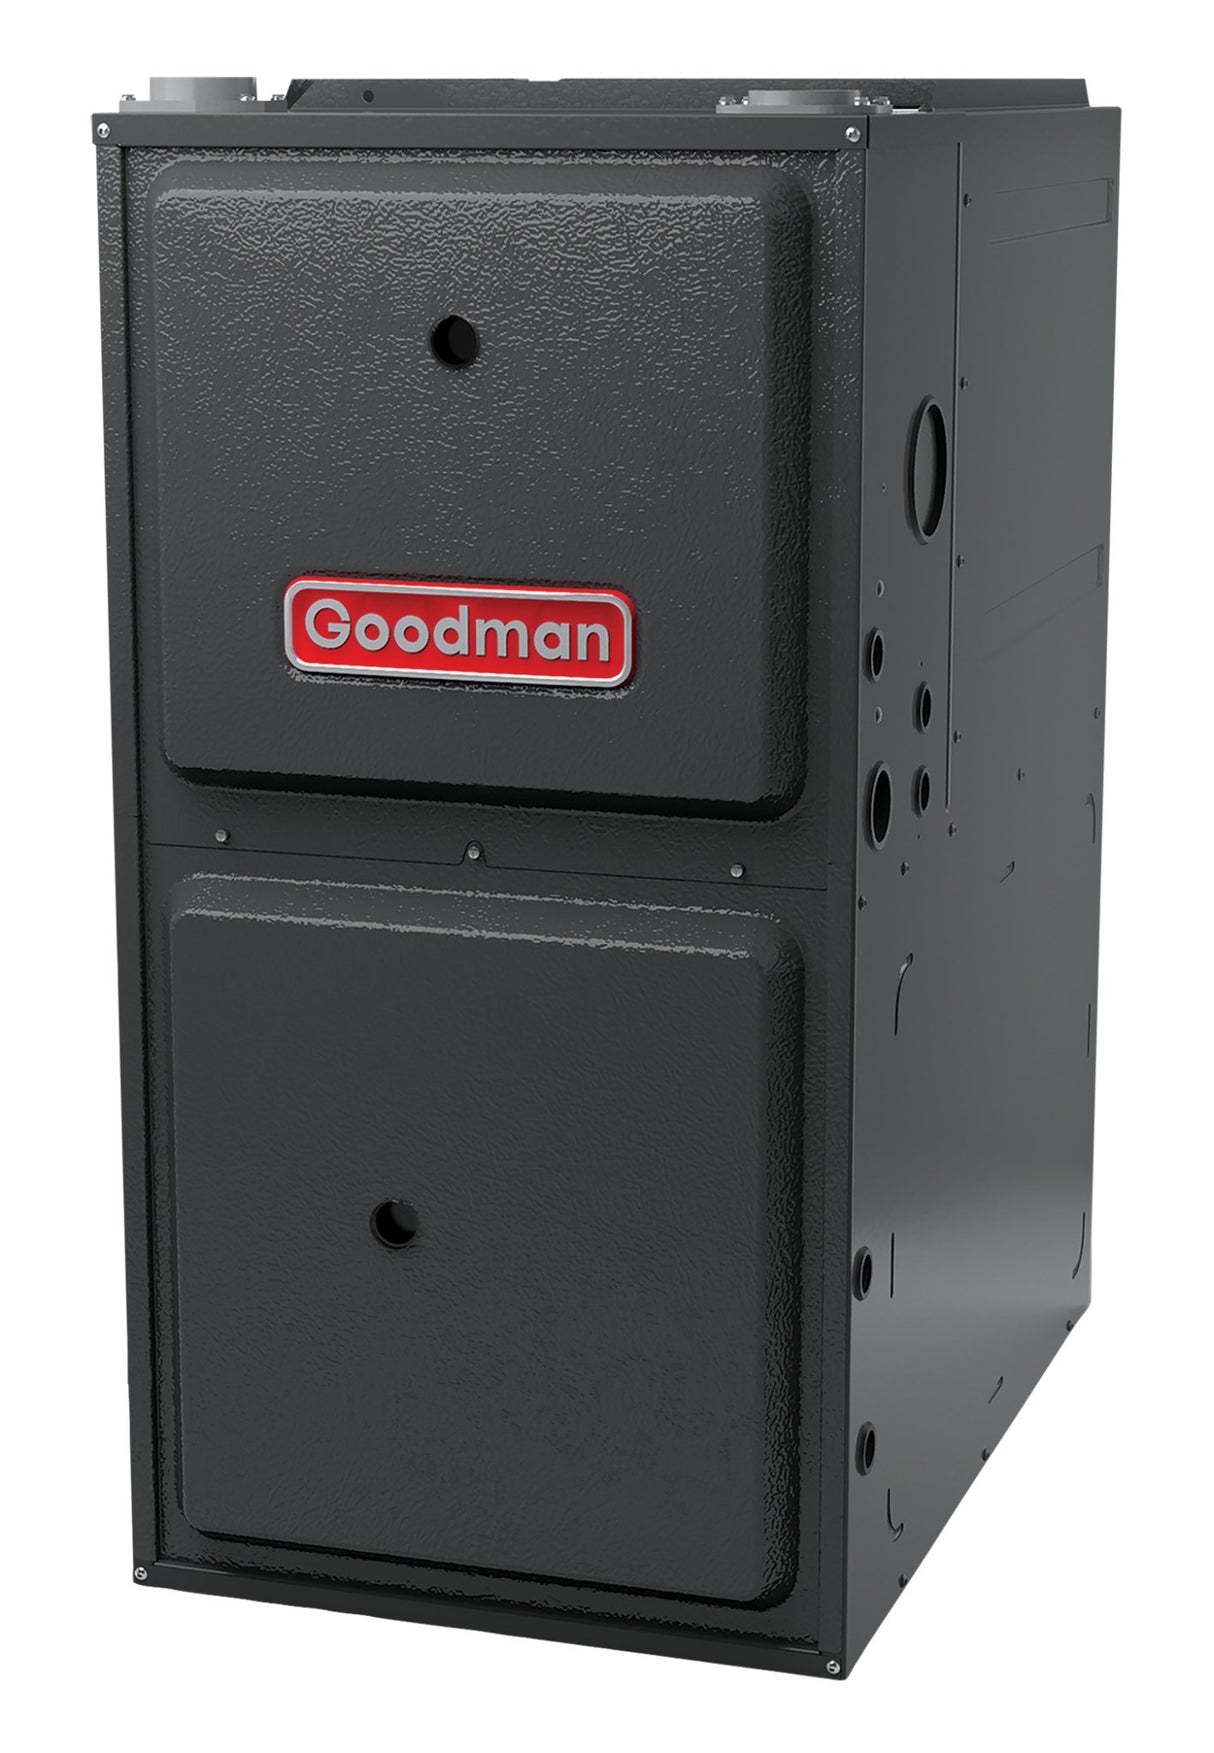 Goodman 96% Gas Furnace and AC System Multi Speed ECM Single Stage GM9S960805CU - acunitsforless.com